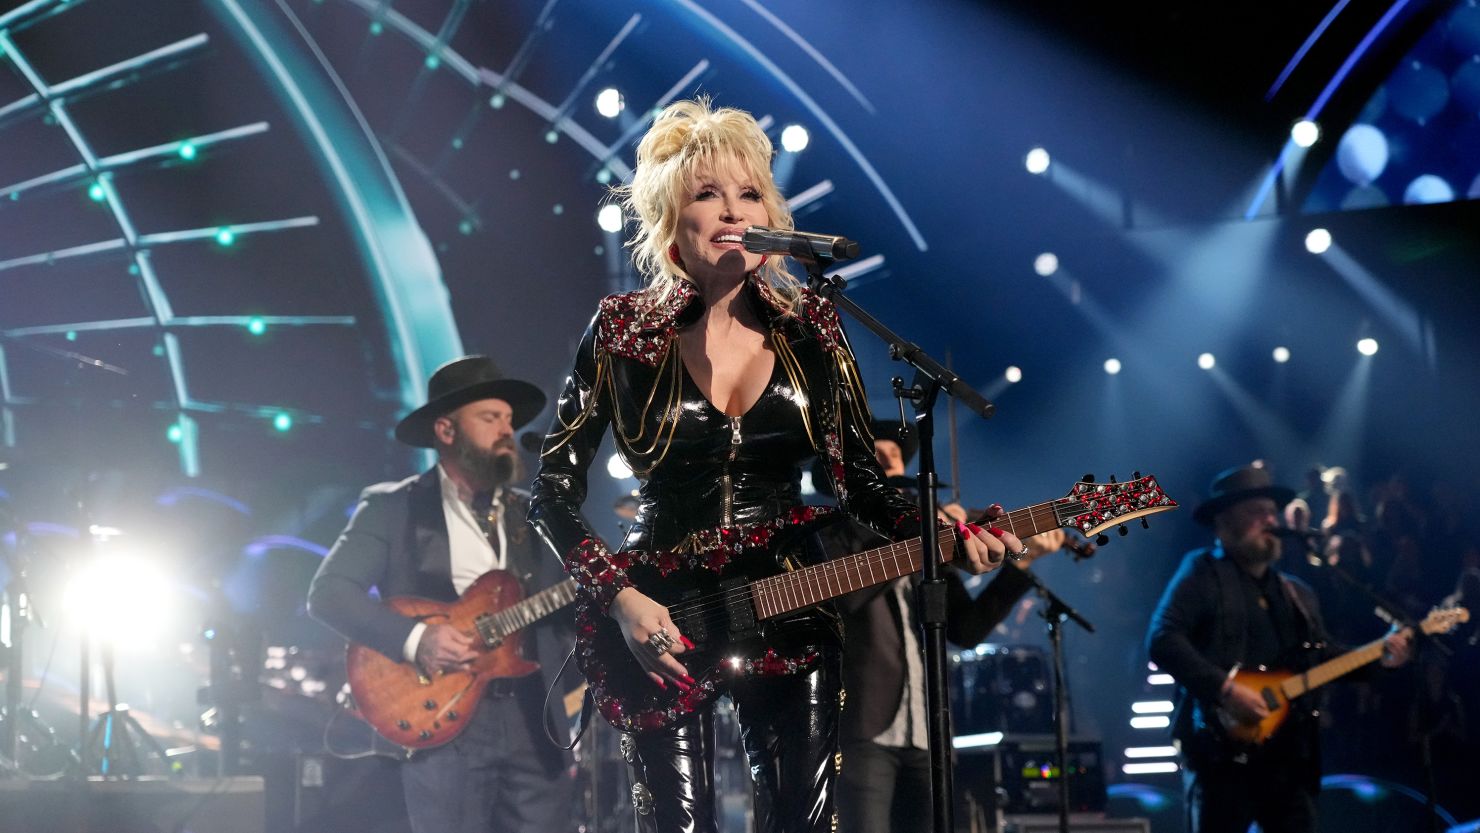 Dolly Parton performed in Los Angeles at the Rock and Roll Hall of Fame induction ceremony in 2022.